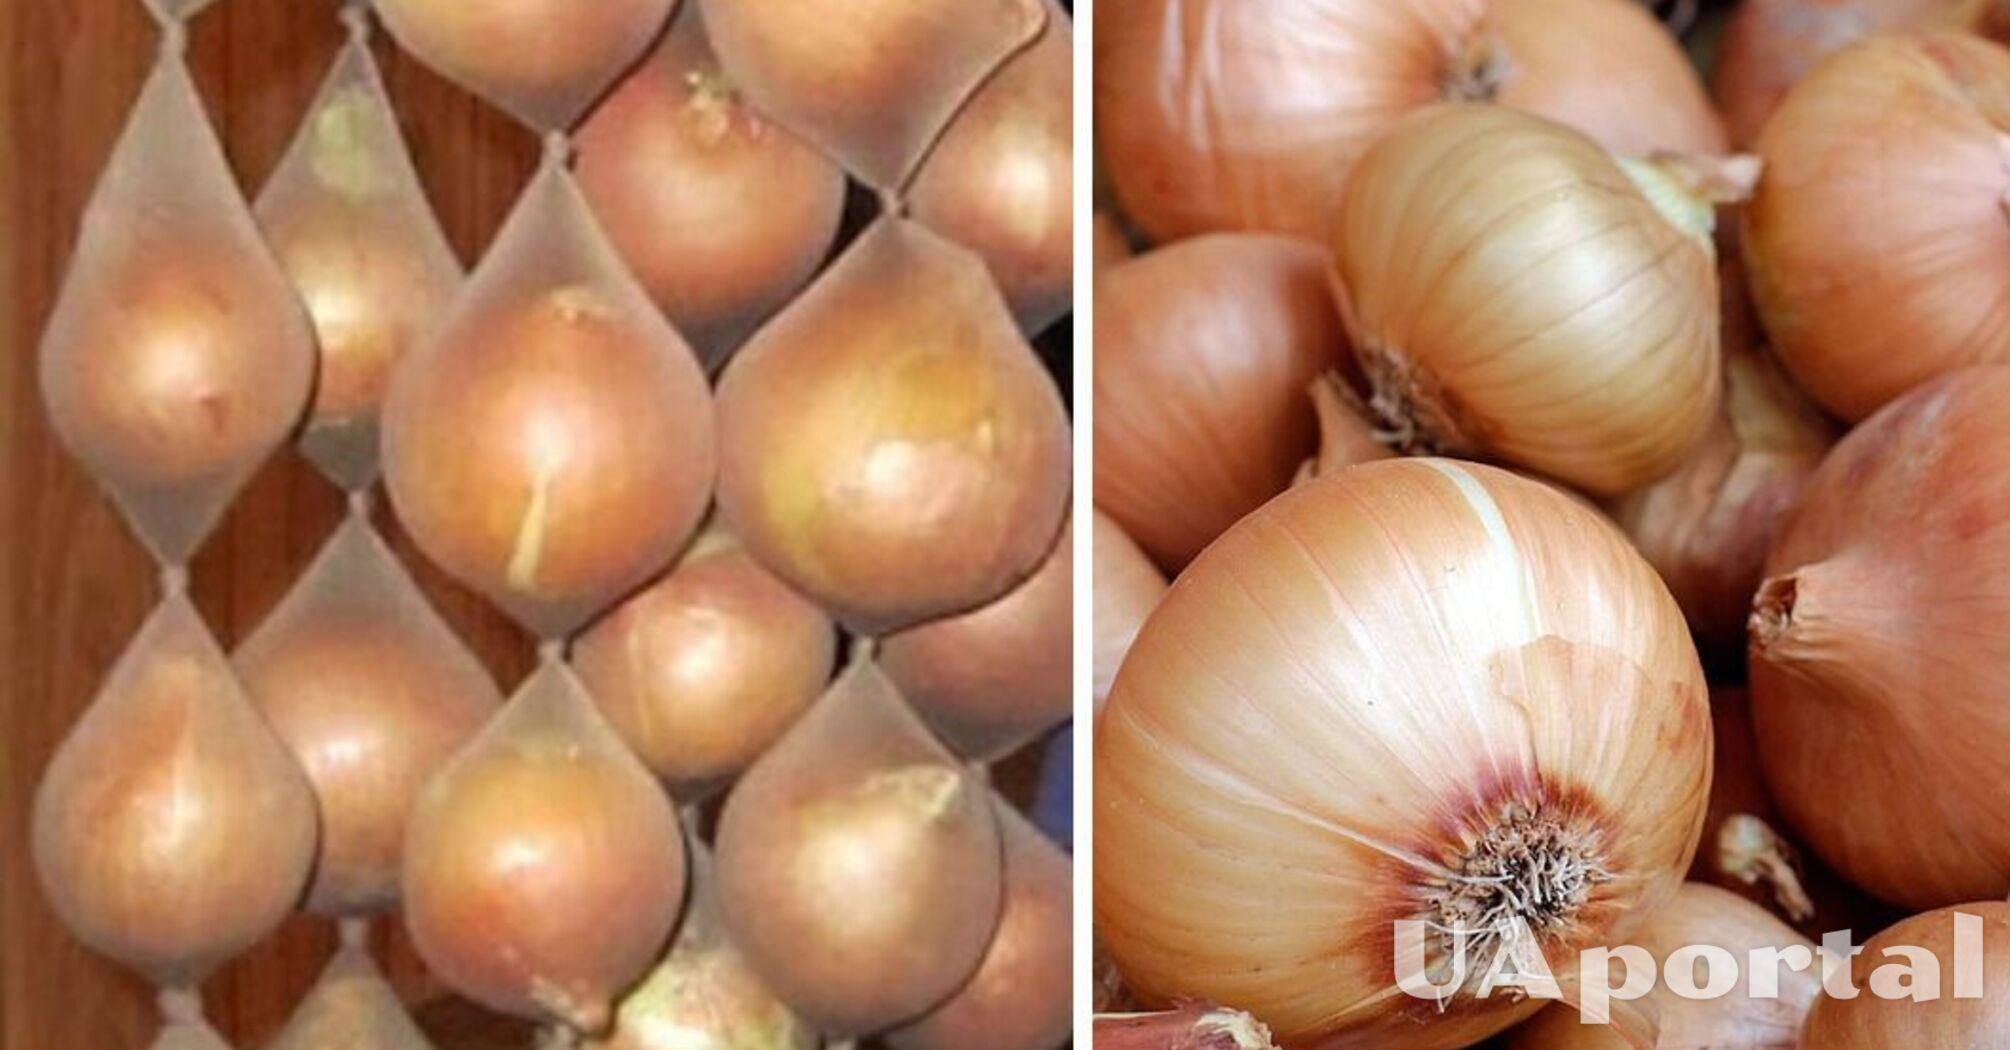 Experts have suggested how to store onions so that they don't get moldy: You will need a pair of tights